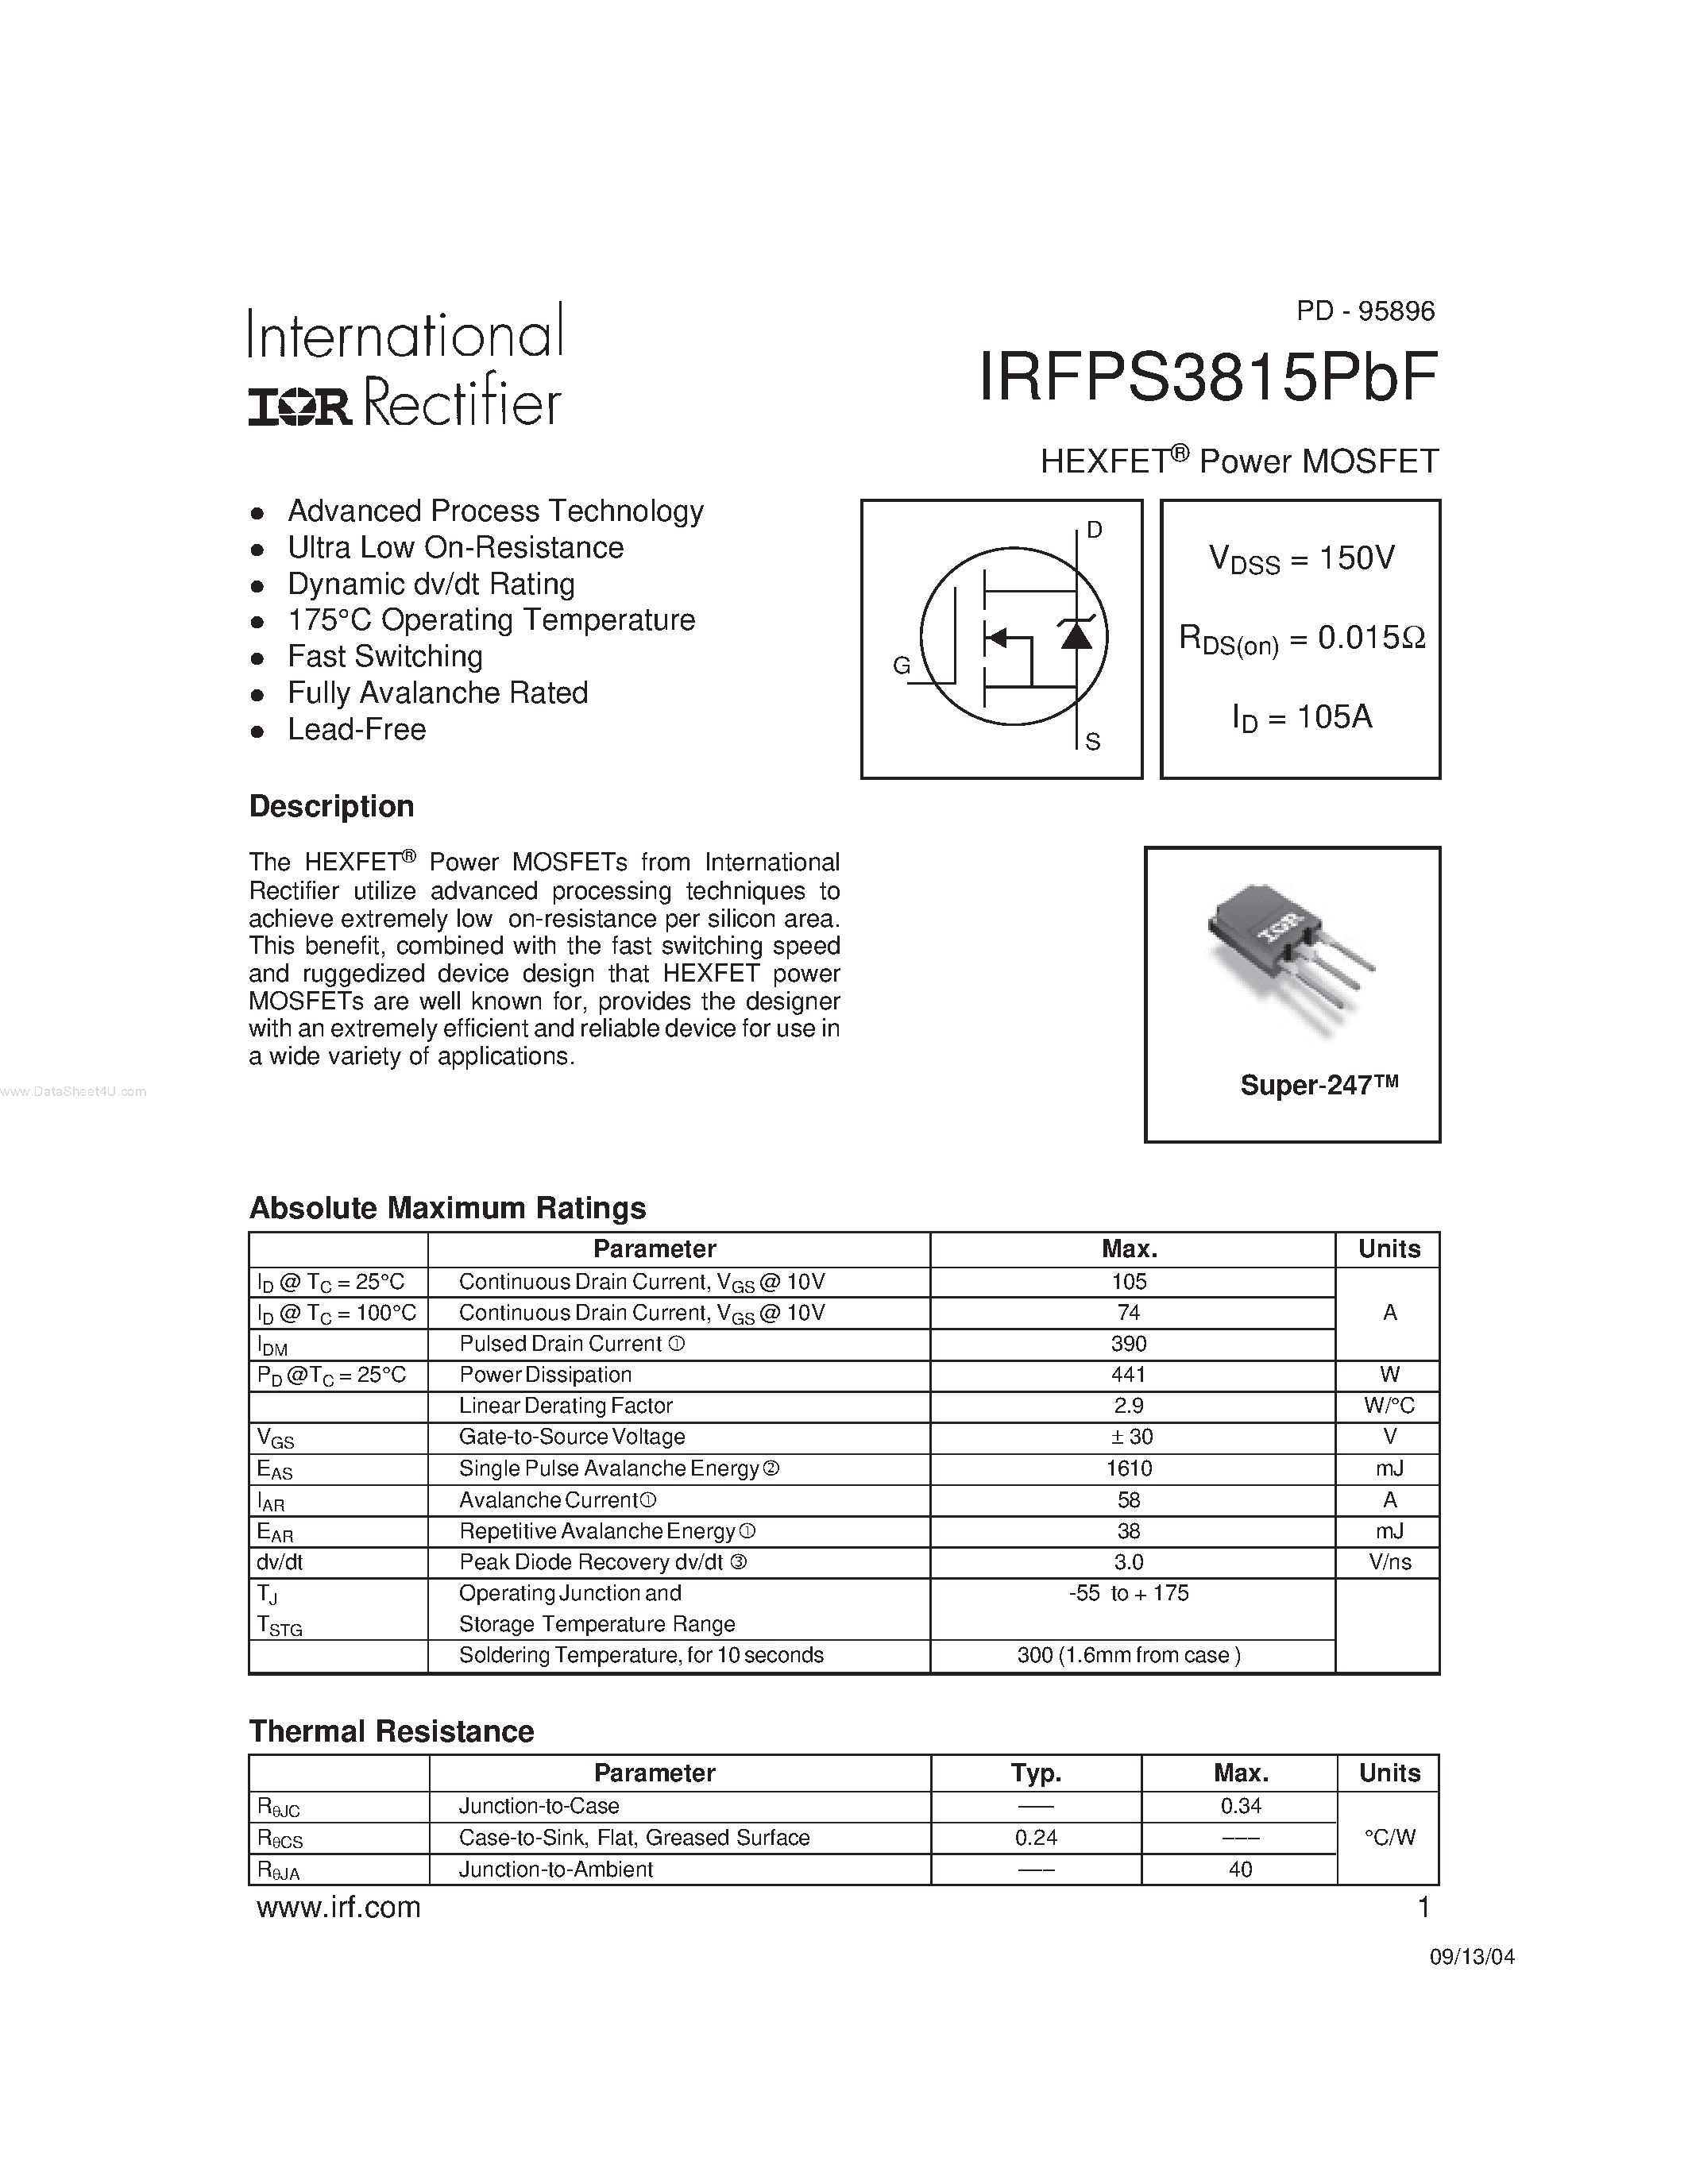 Даташит IRFPS3815PBF - HEXFET Power MOSFET страница 1